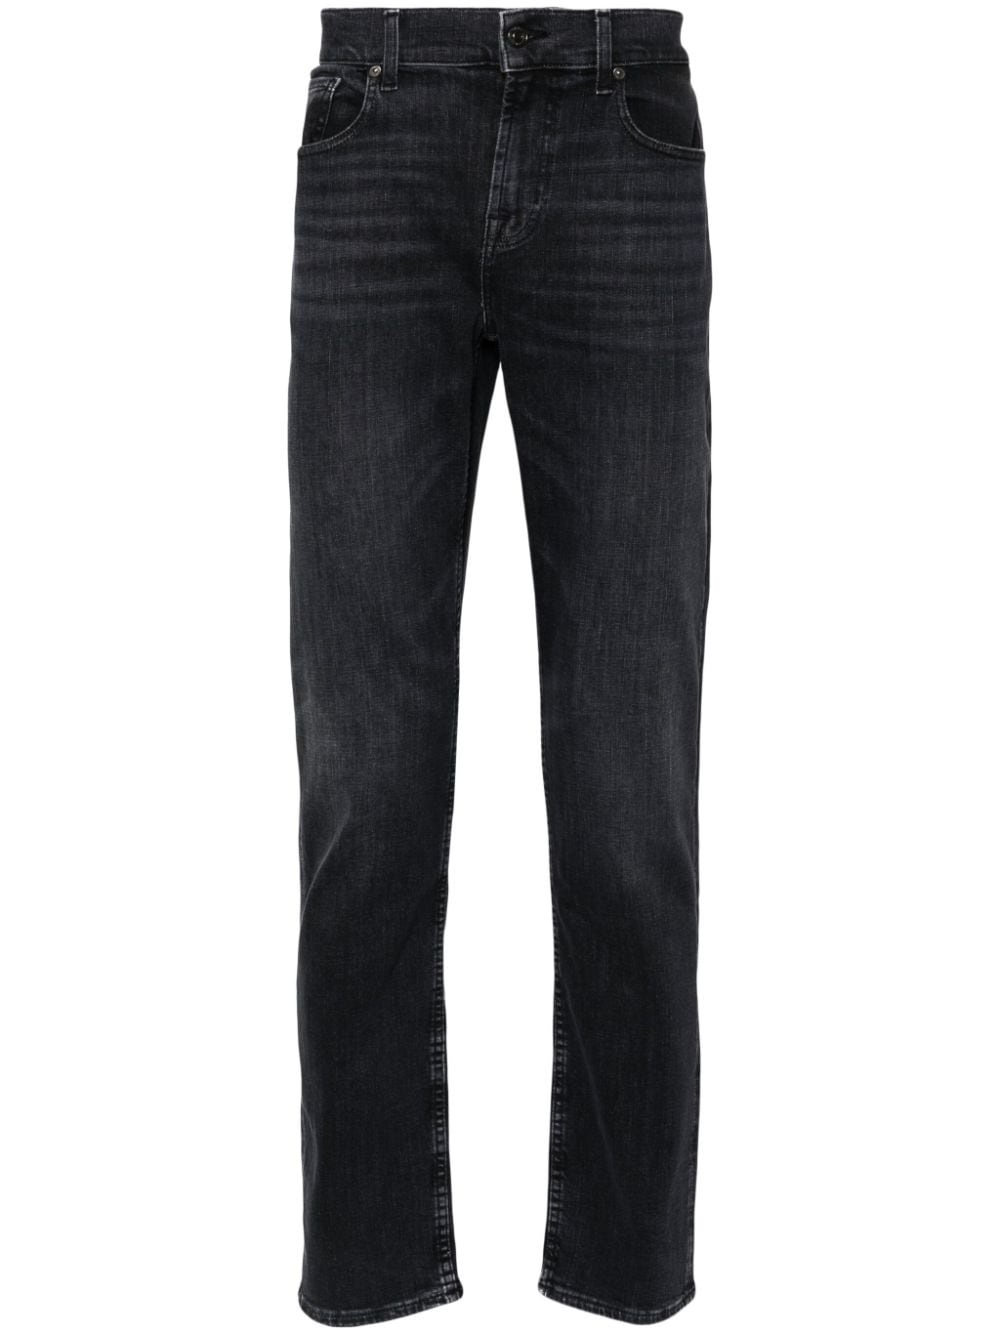 7 For All Mankind Slimmy slim-fit jeans - Black von 7 For All Mankind